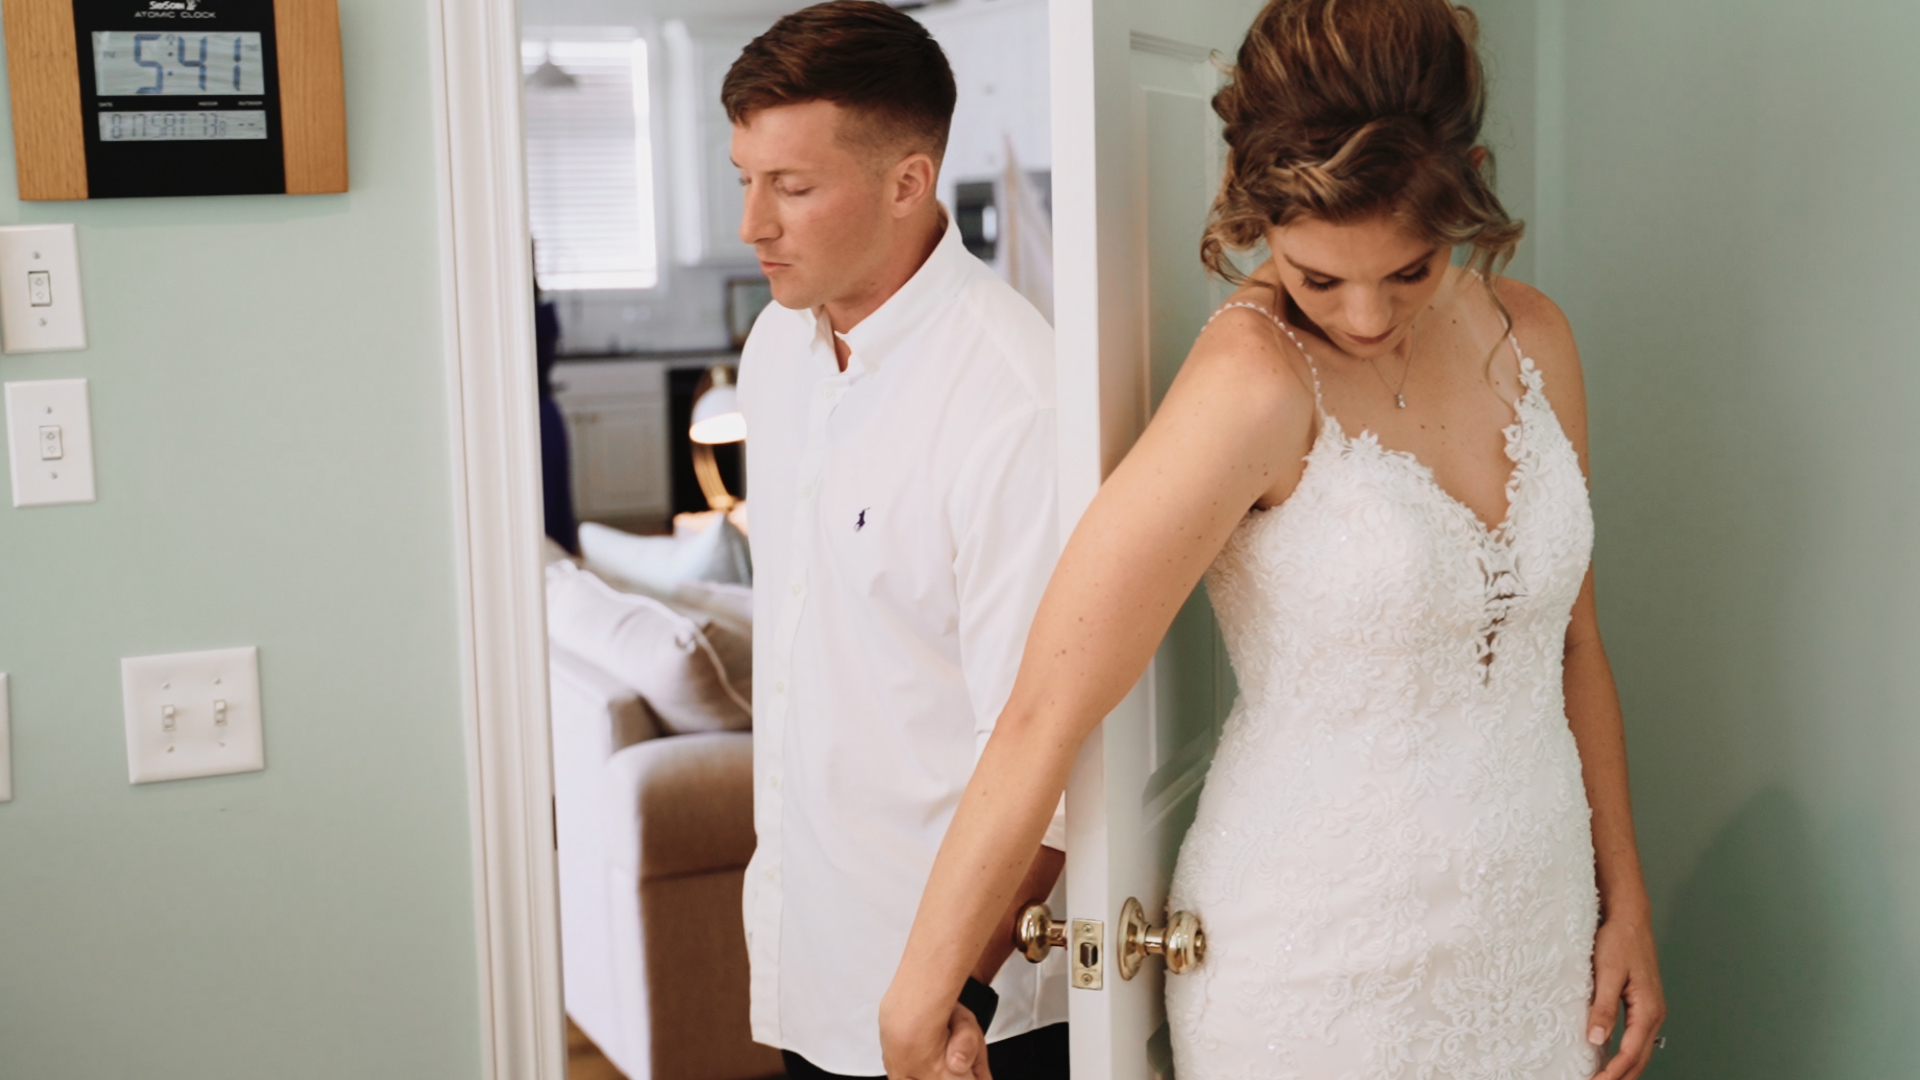 Wedding Videography Tips - Finding The Right Vendor